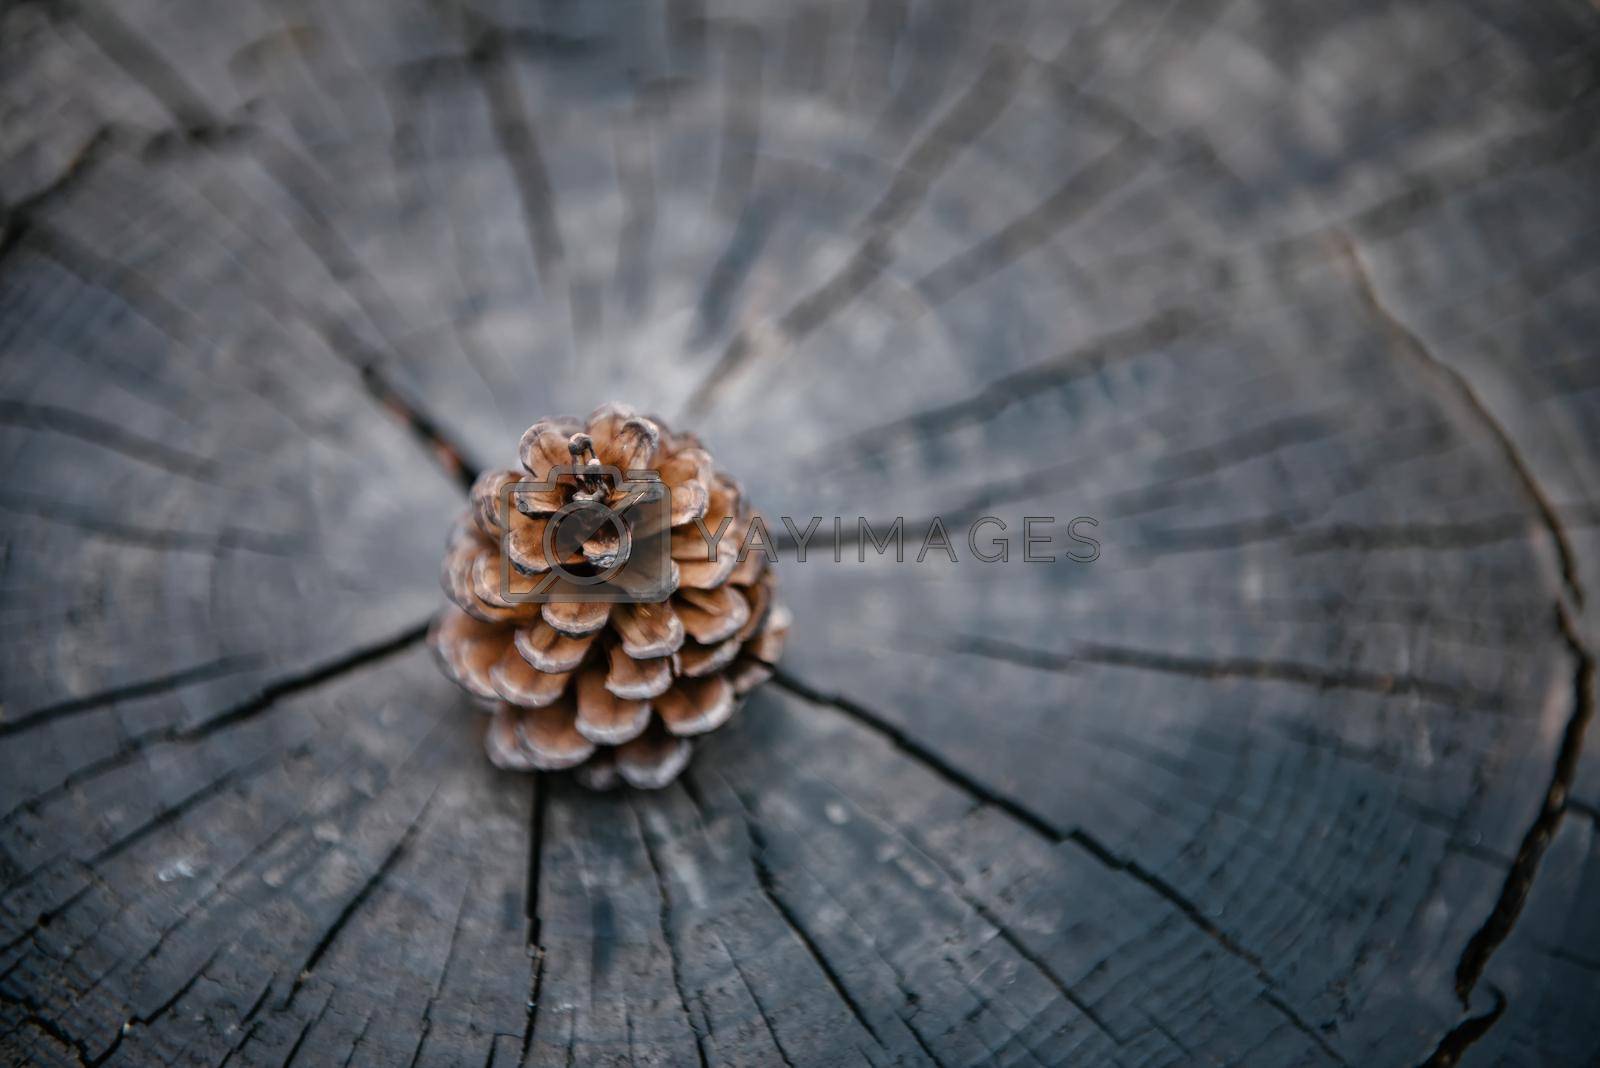 Pine Cone on Wooden Texture Background, Close-Up of Nature Dry Pine Cone Isolated on Tree Wood Annual Ring. Brown Pine Seed for Celebration Decorative. Abstract Background and Natural Texture